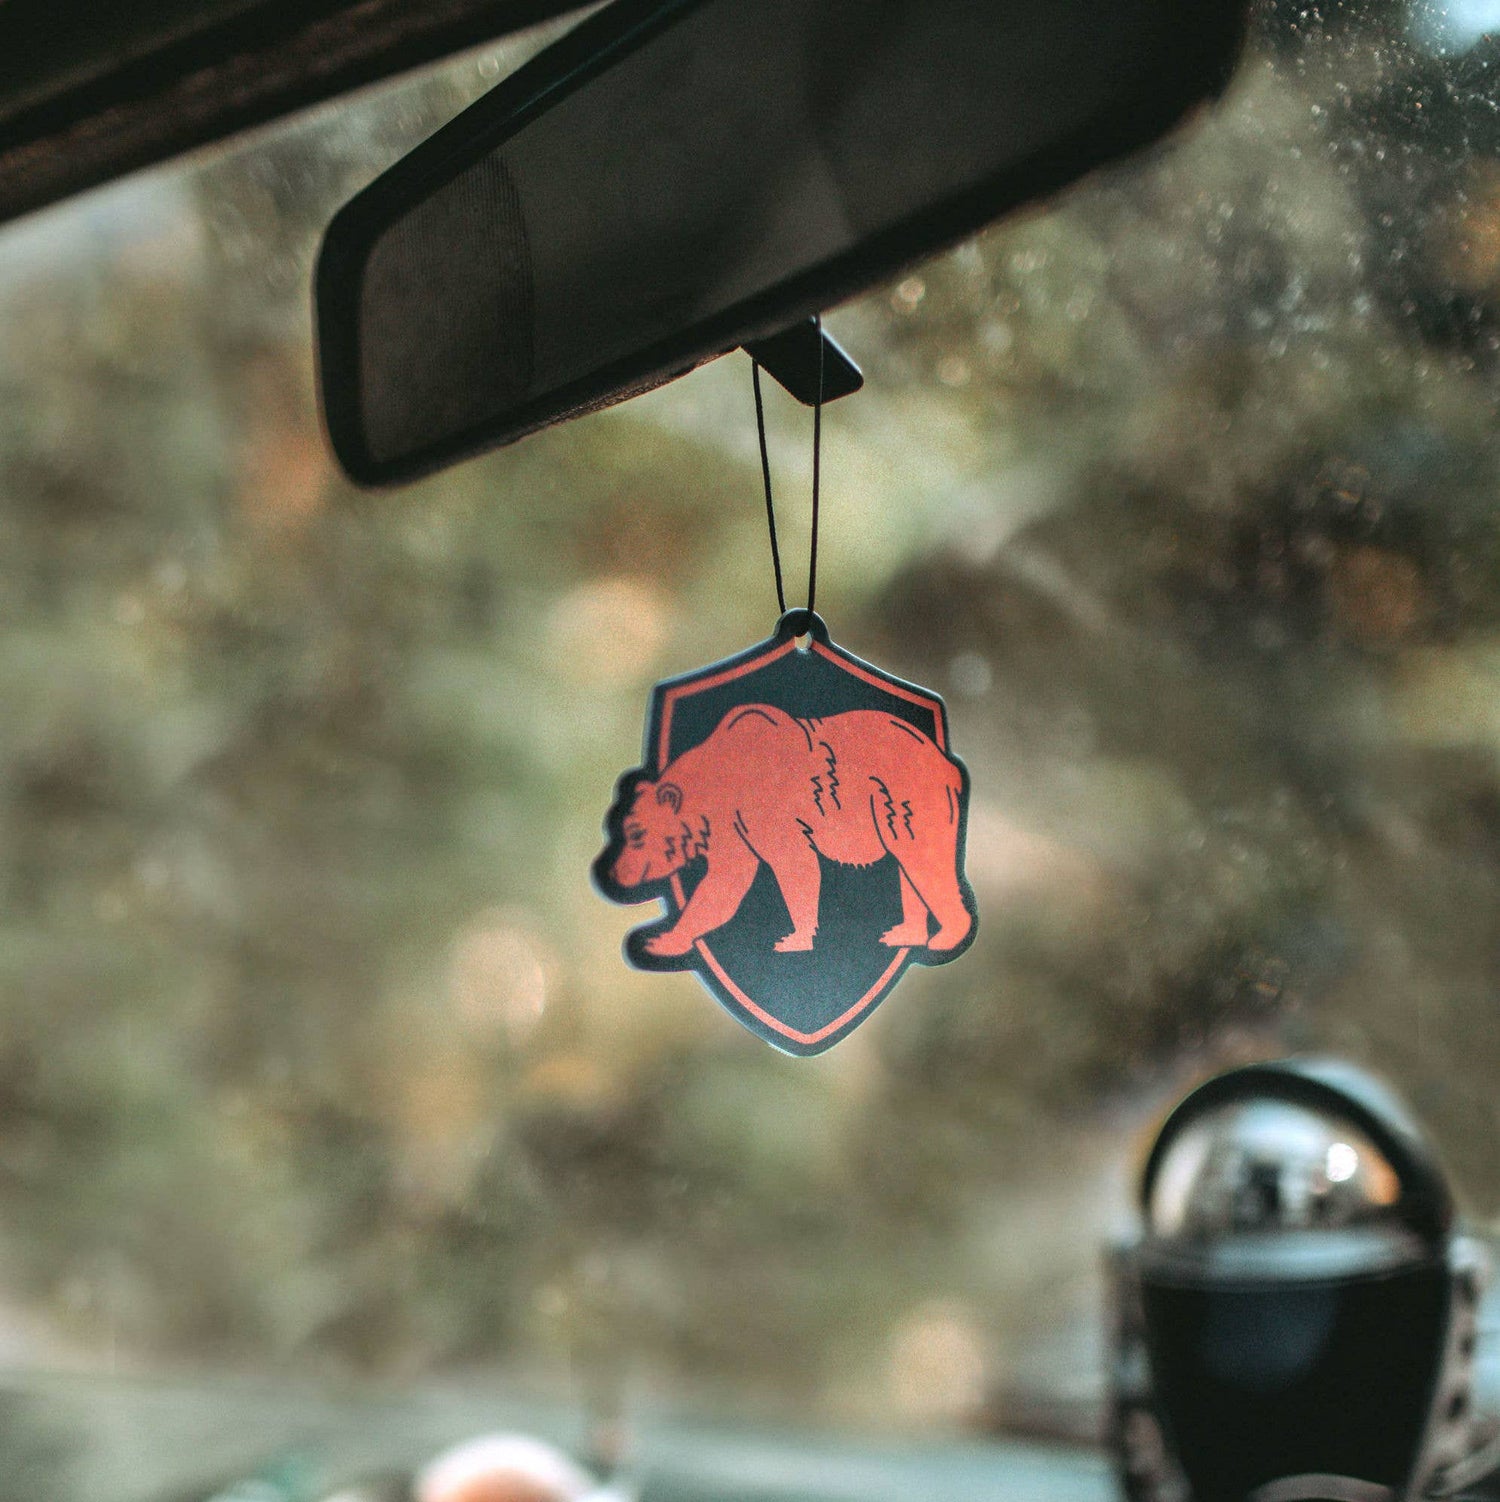 Bear shaped air freshener by Good + Well Supply Co